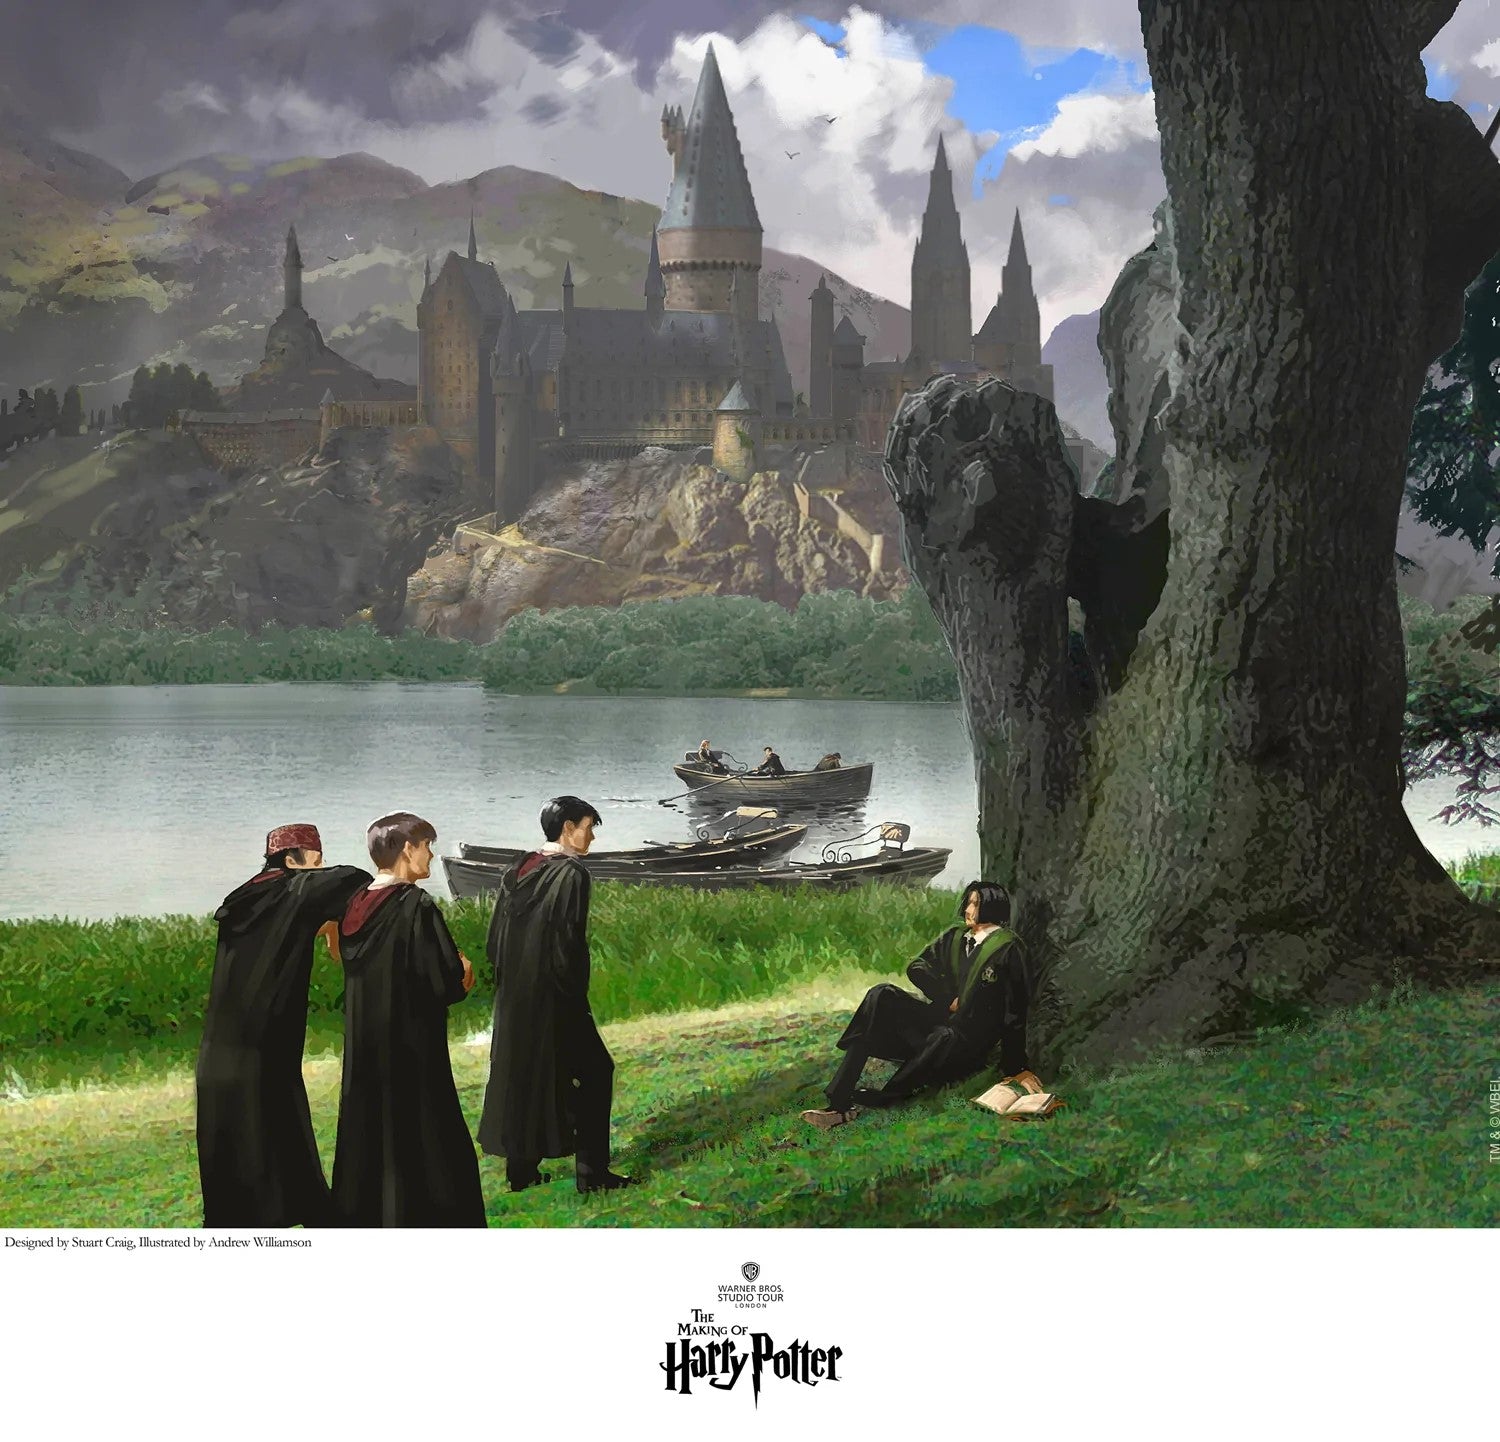 Taunting Snape - By Stuart Craig - Giclee on Paper